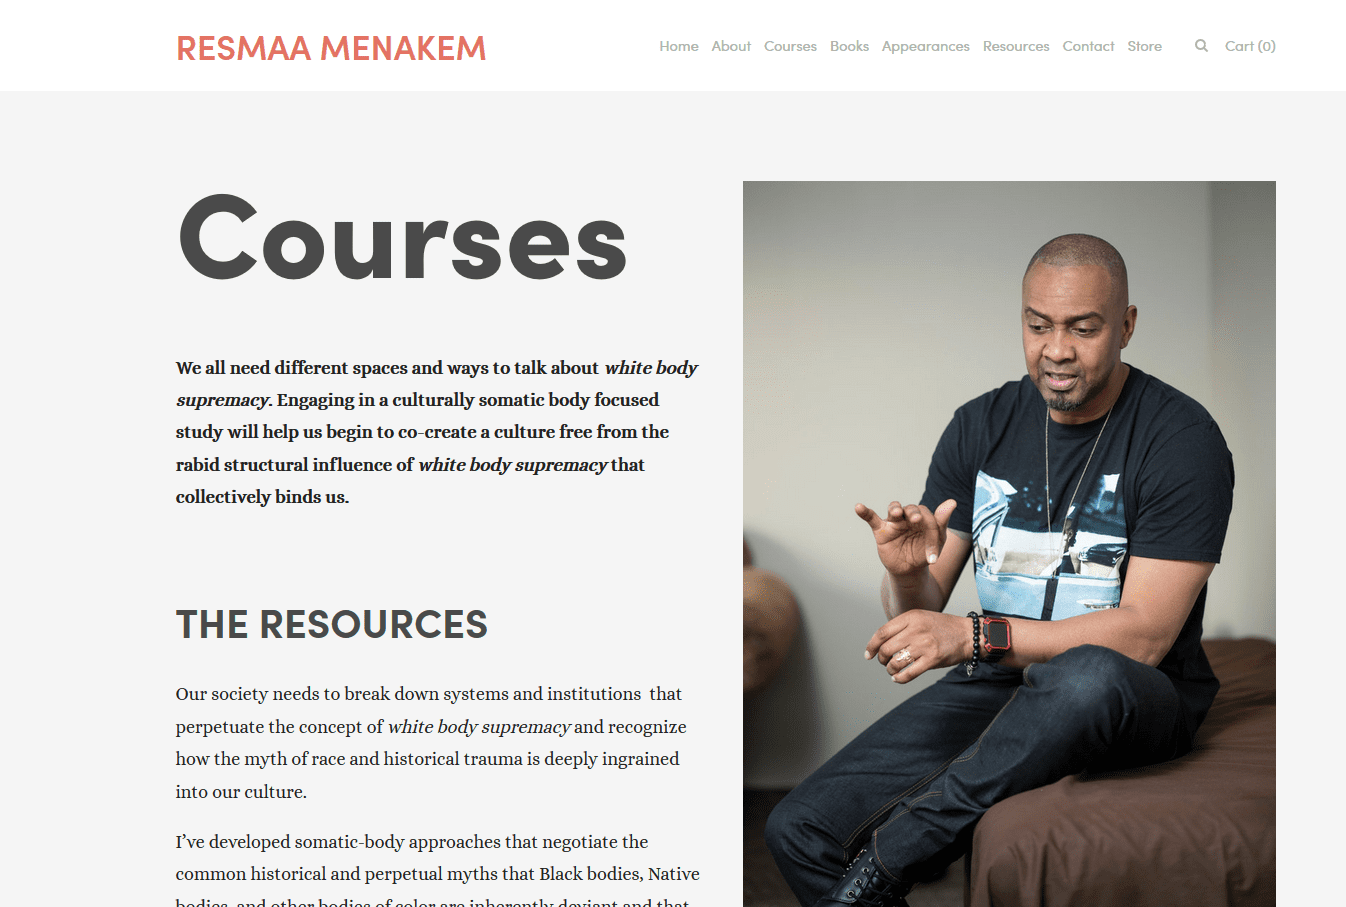 FREE 5-Day Racialized Trauma Home Study Course by Resmaa Menakem